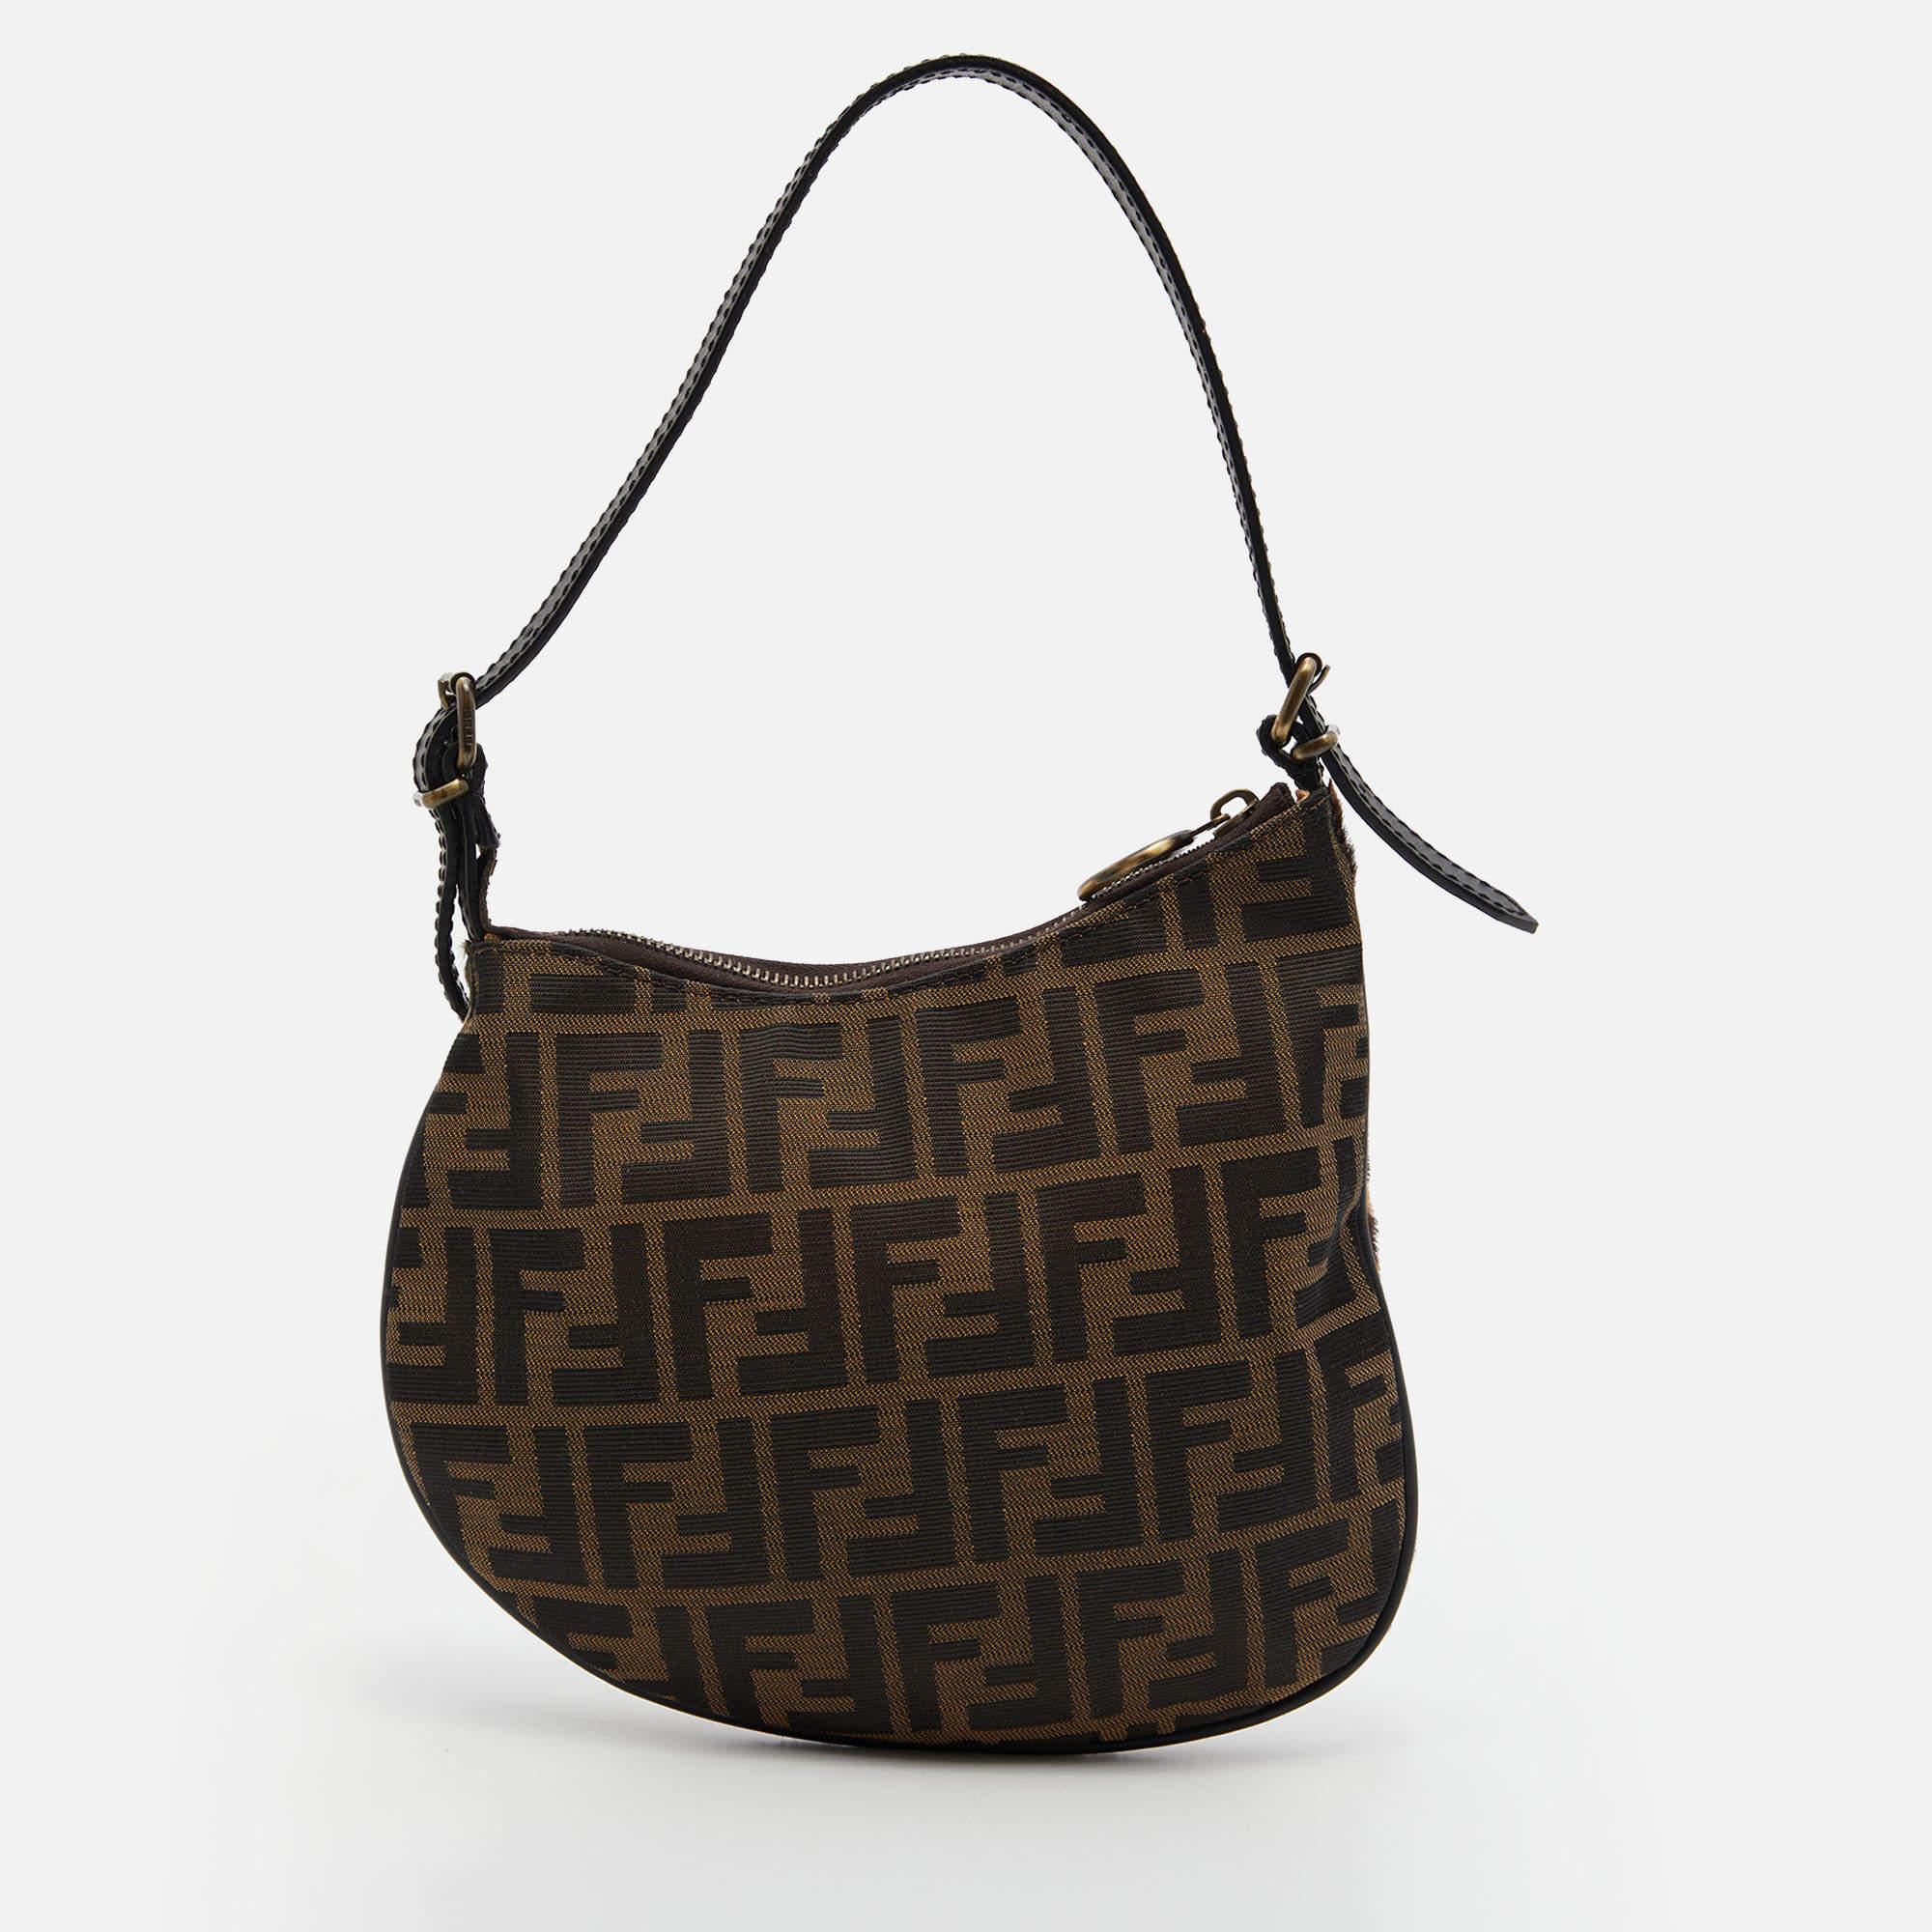 Carry a creation of wonder in your arms by choosing this Fendi Oyster bag which has been meticulously crafted from Zucca canvas and calfhair. The hobo has a distinct shape, a flat handle, and a well-sized fabric interior.

